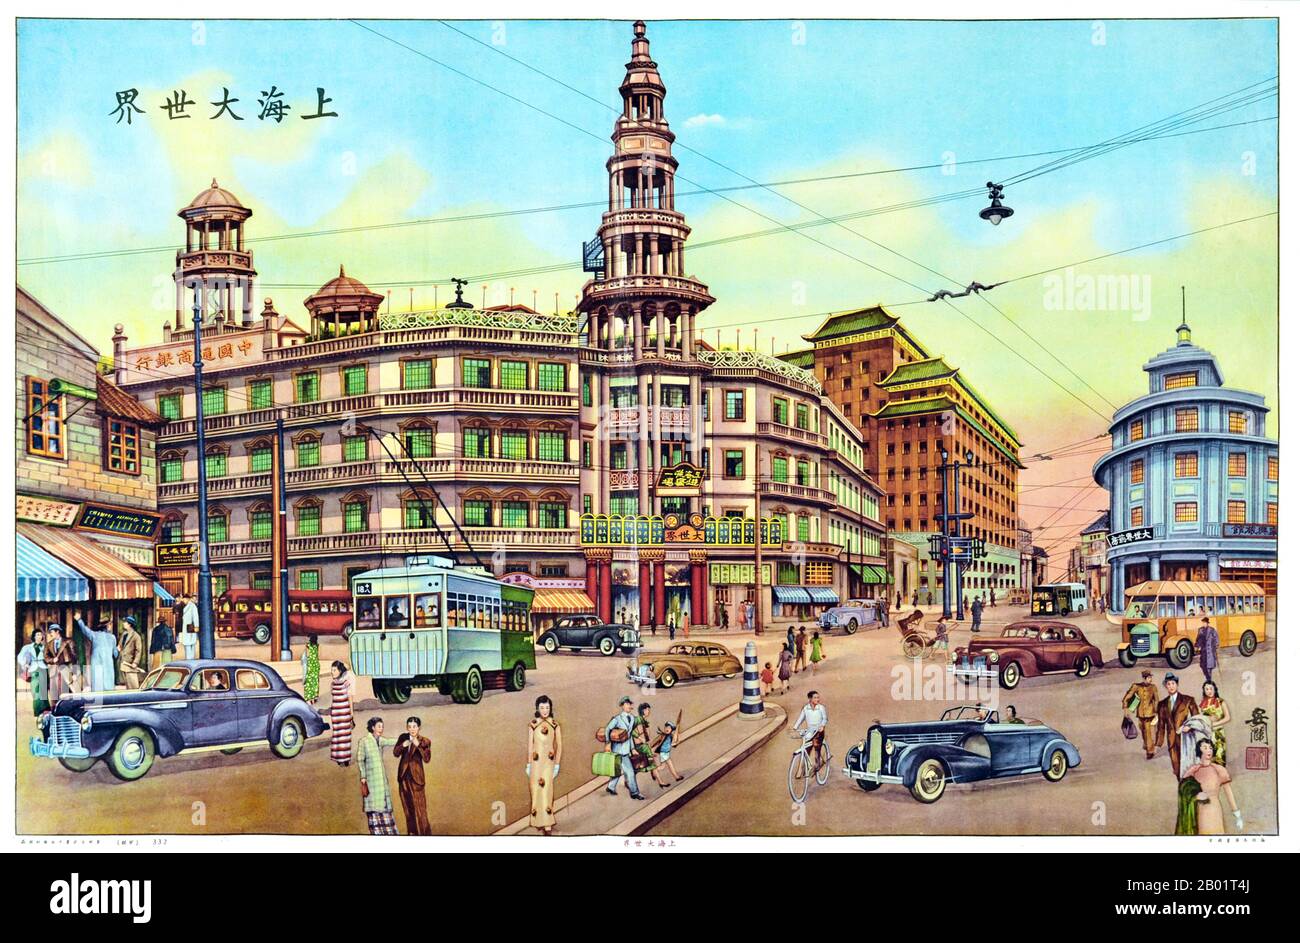 China: Shanghai's Da Shijie or Great World entertainment centre. Postcard, 1930s.  Shanghai’s best-known and largest entertainment complex, Dashijie – the ‘Great World’ – was a six storey building at the junction of today’s Yan’an Donglu and Xijang Nanlu.  According to a contemporary account, the first floor was dedicated to gambling and sing-song girls in dresses slit to the thigh, the second to restaurants and actors, the third to ‘a bevy of girls in high-collared gowns slit to reveal their hips’, the fourth to more gambling tables and massage services. Stock Photo